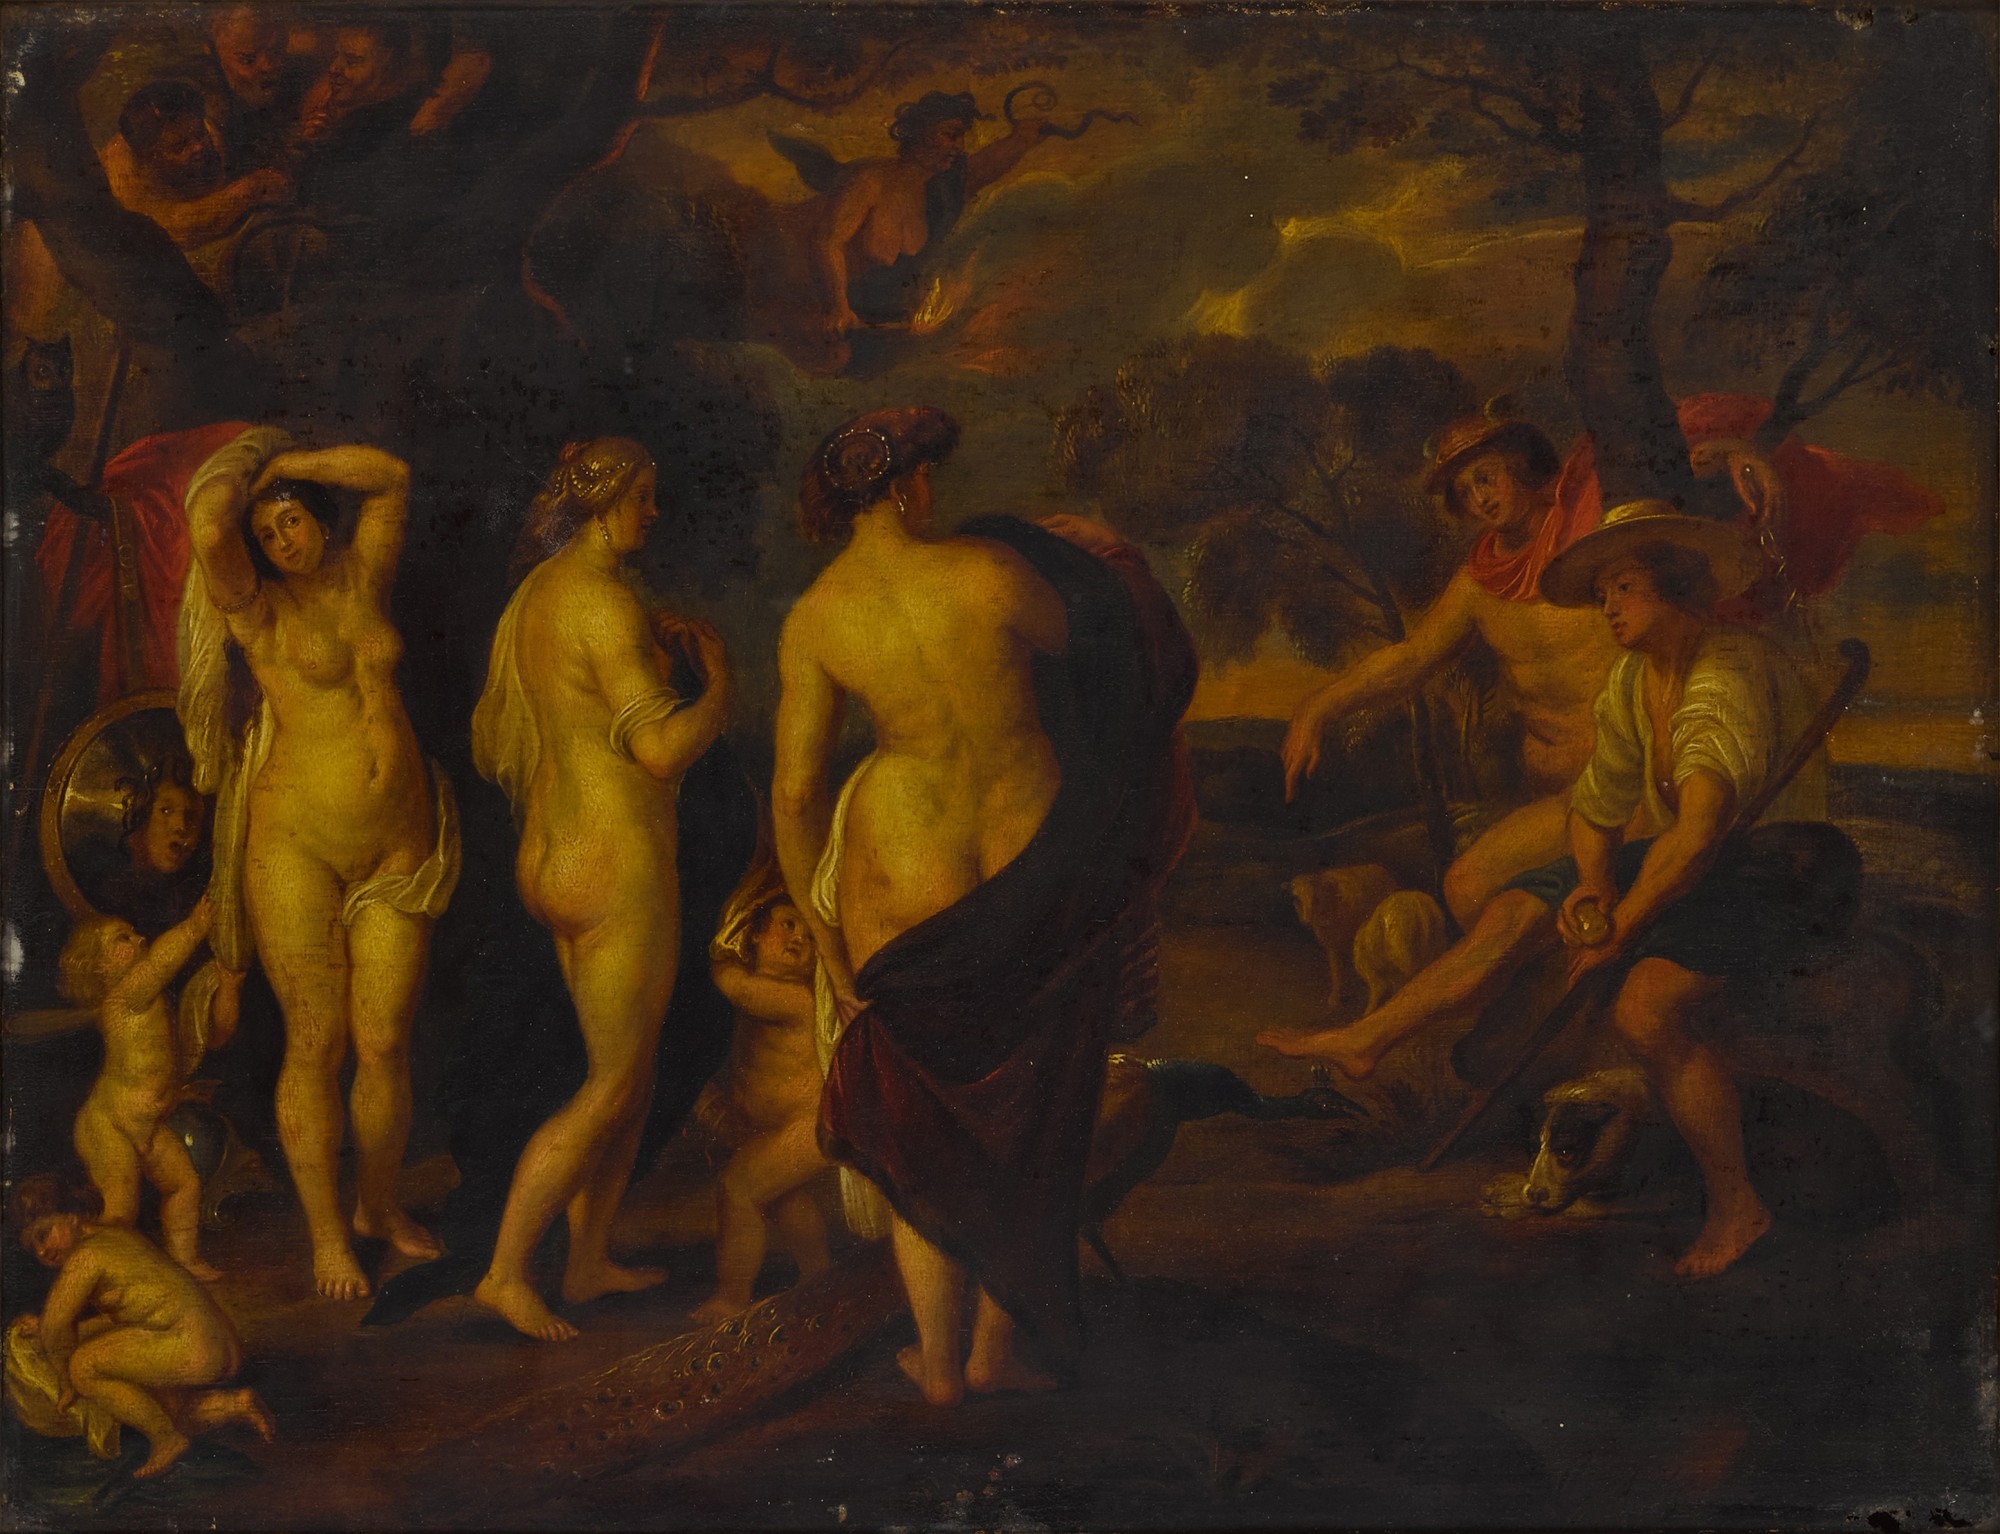 The Judgment of Paris by Peter Paul Rubens, 17th Century